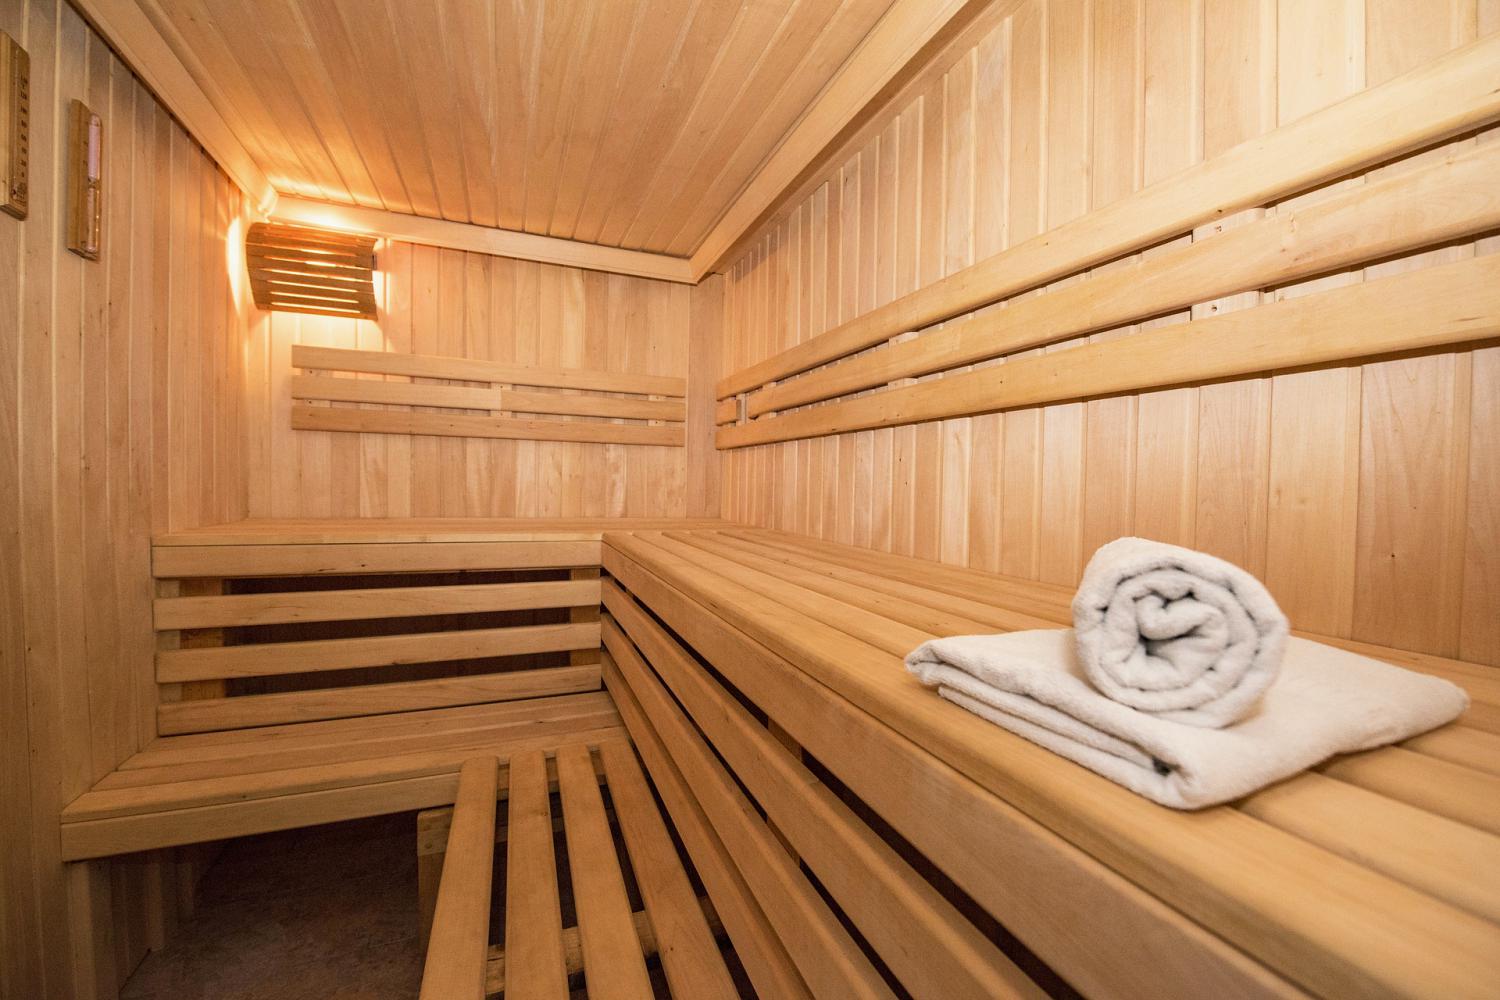 Finnish sauna for our guests